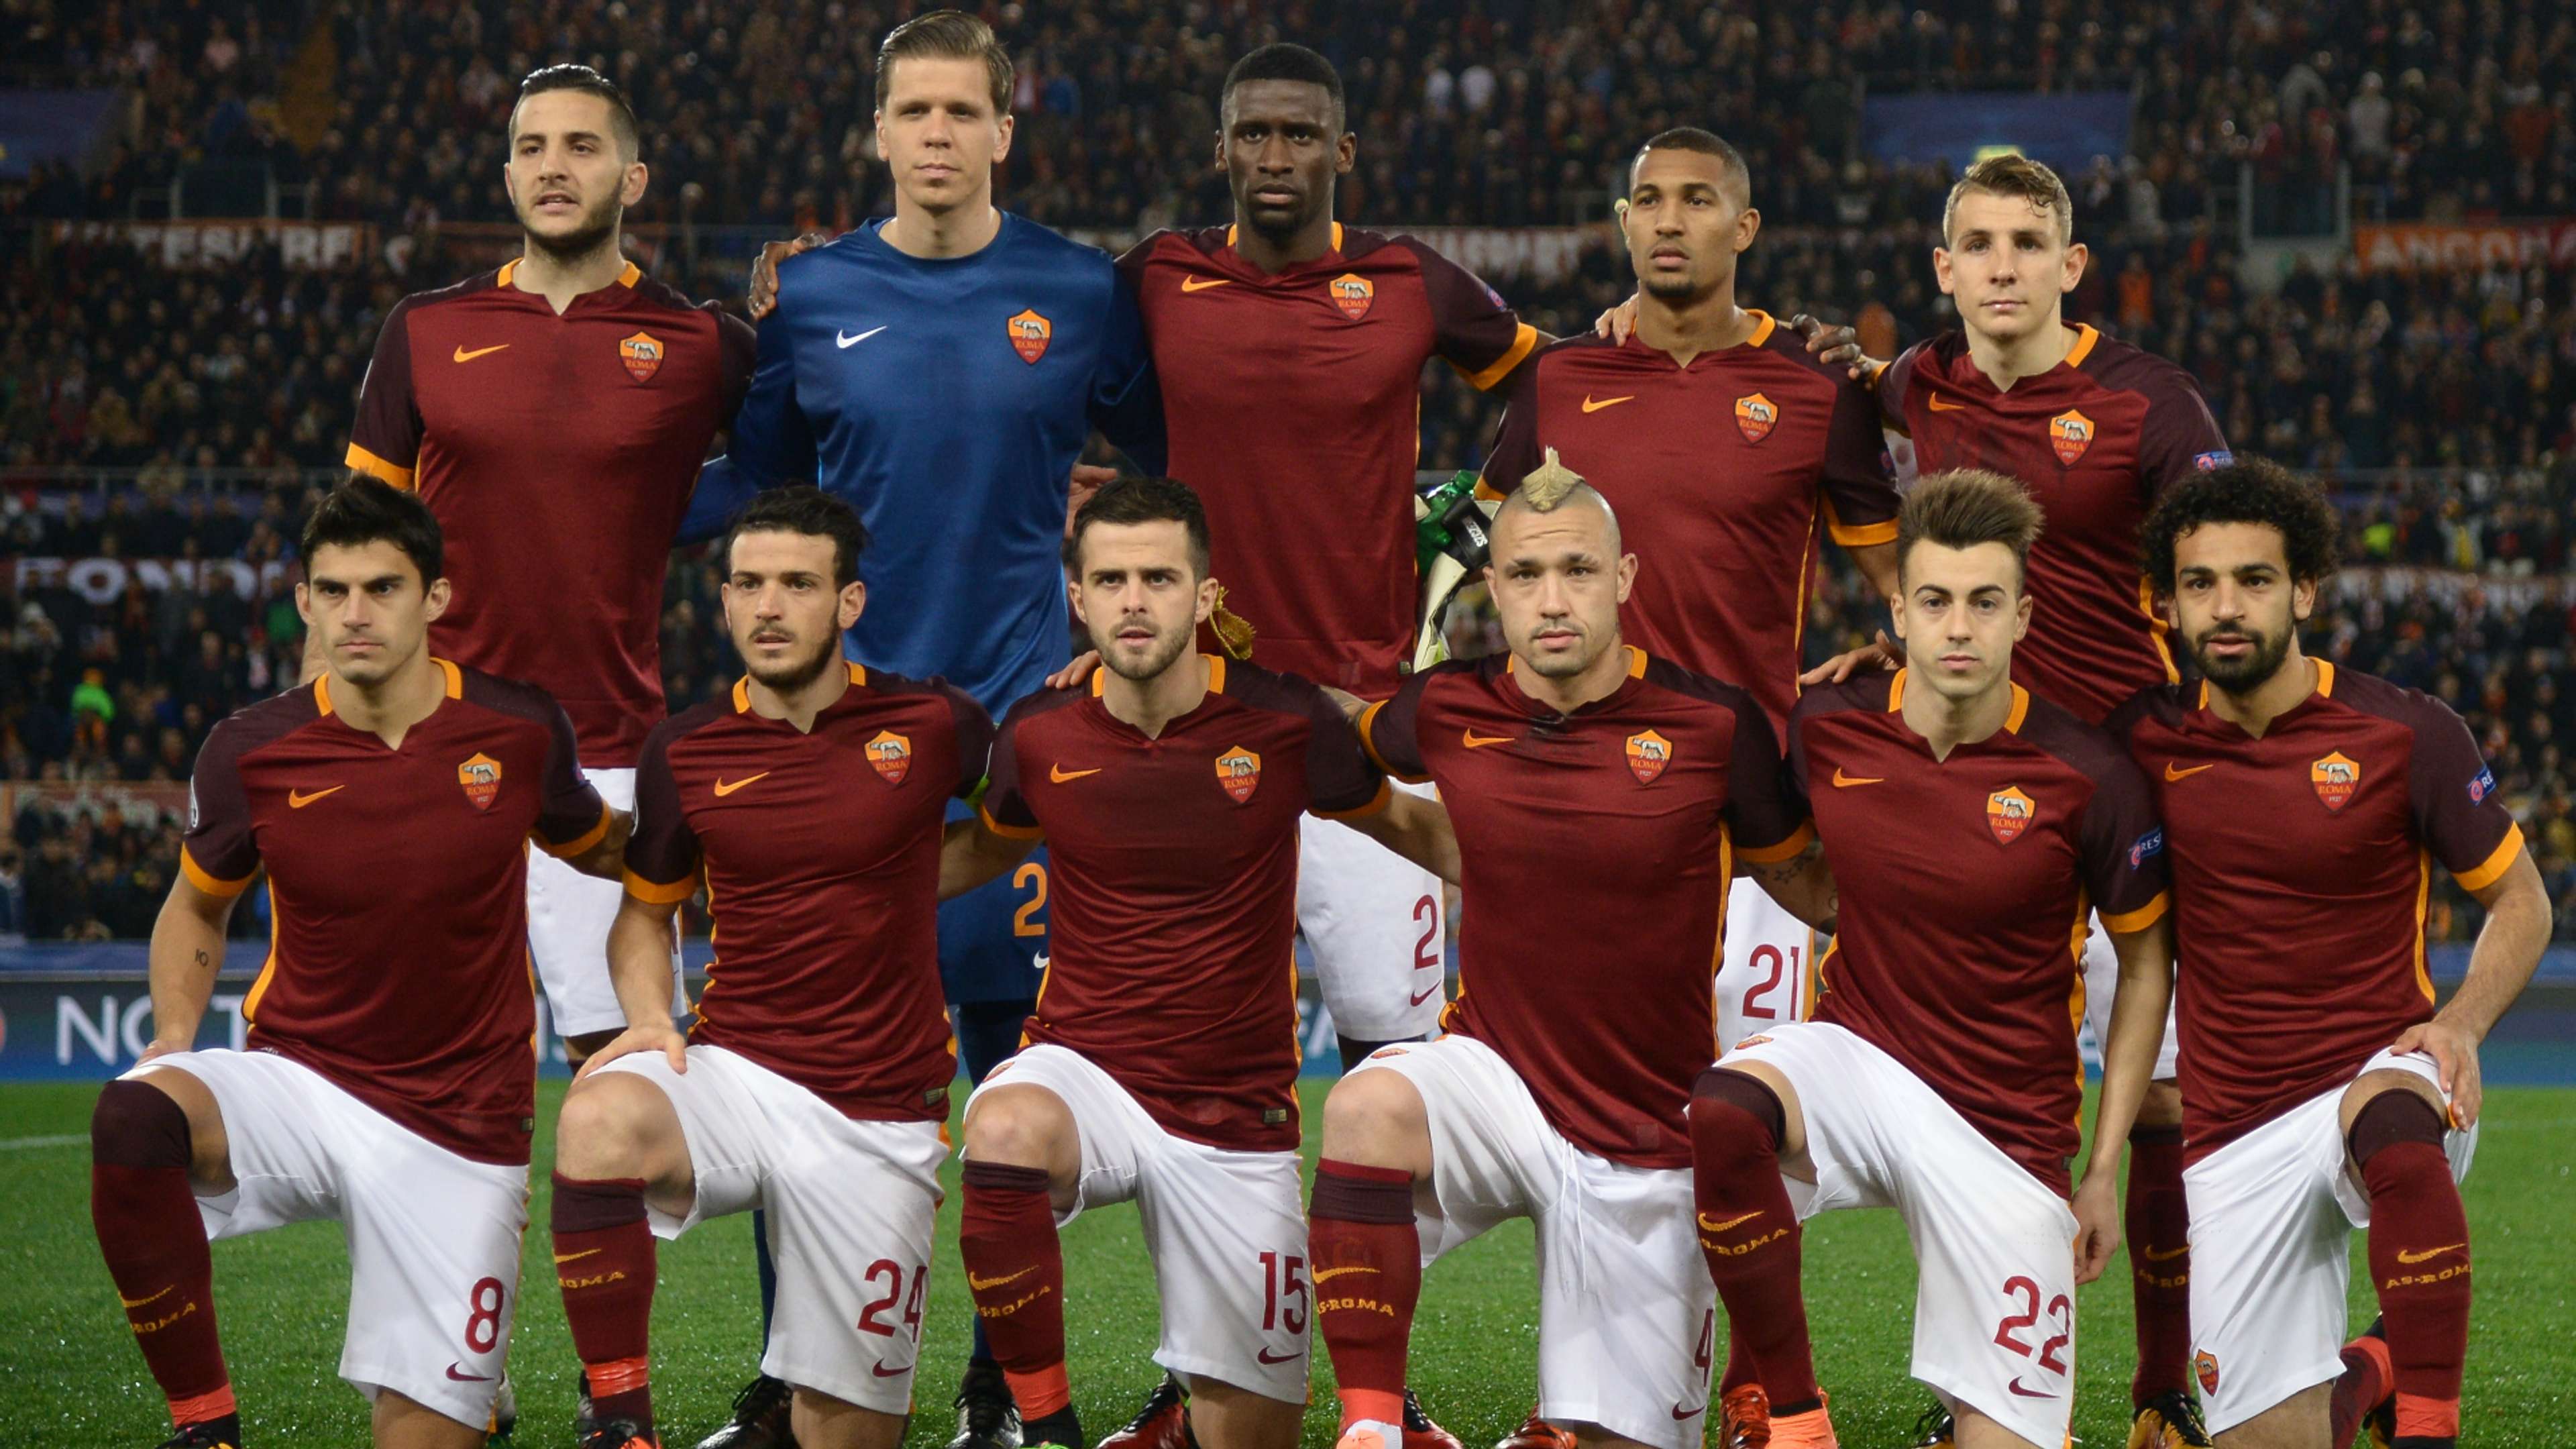 Roma lineup against Real Madrid in Champions League 2015-16